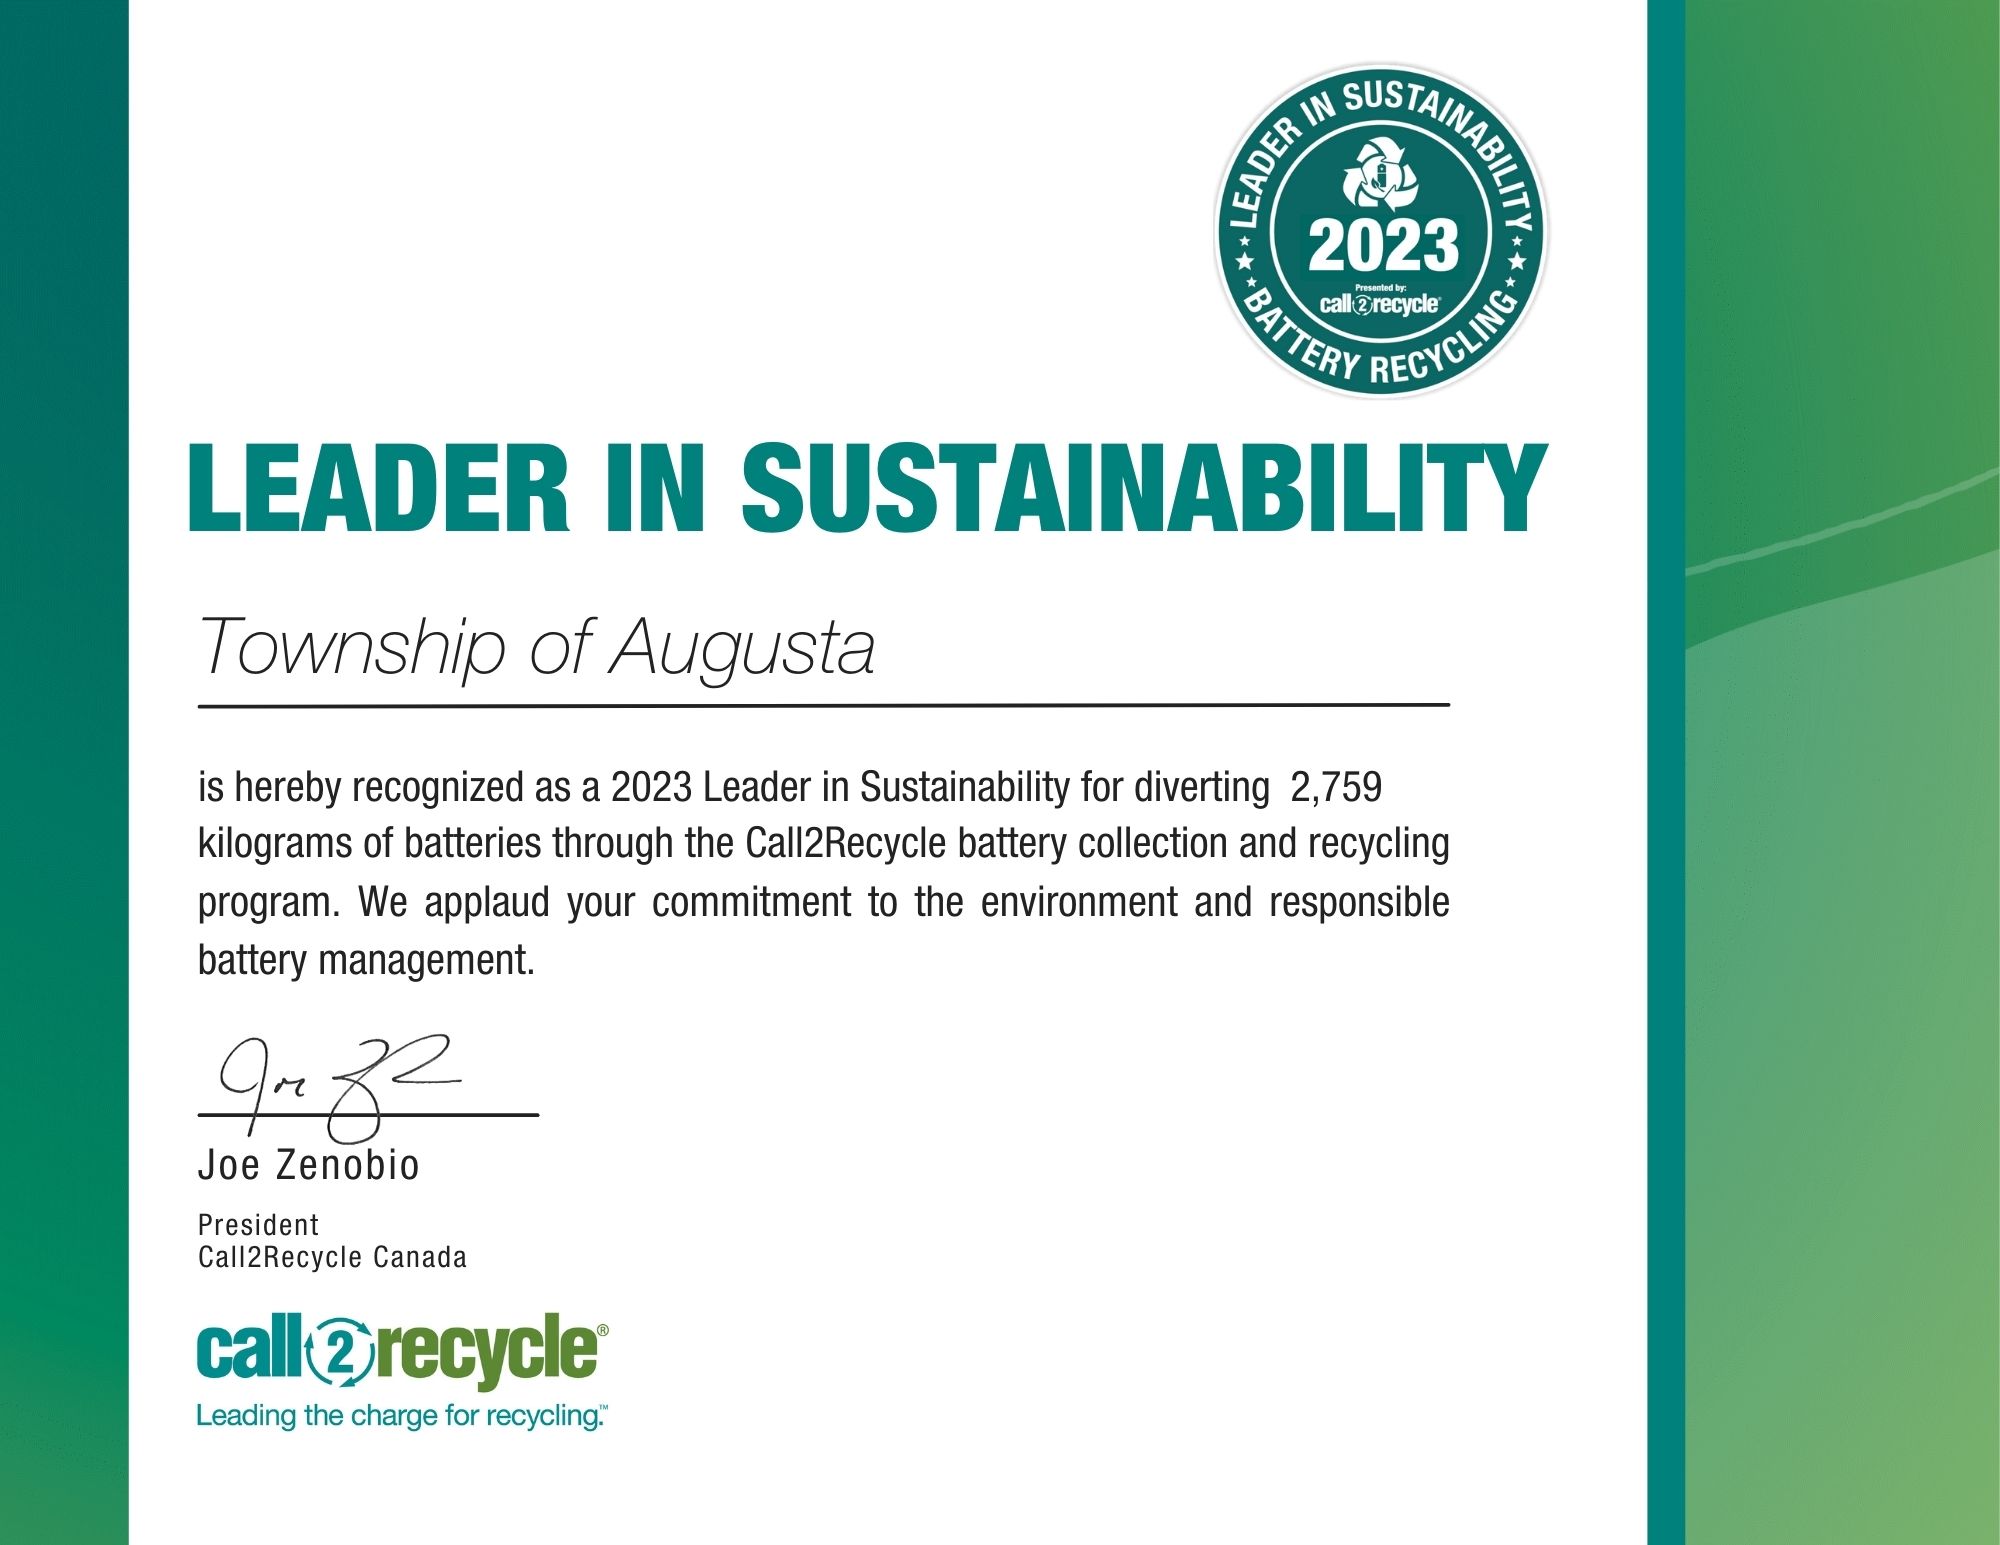 leader in sustainability award for 2023